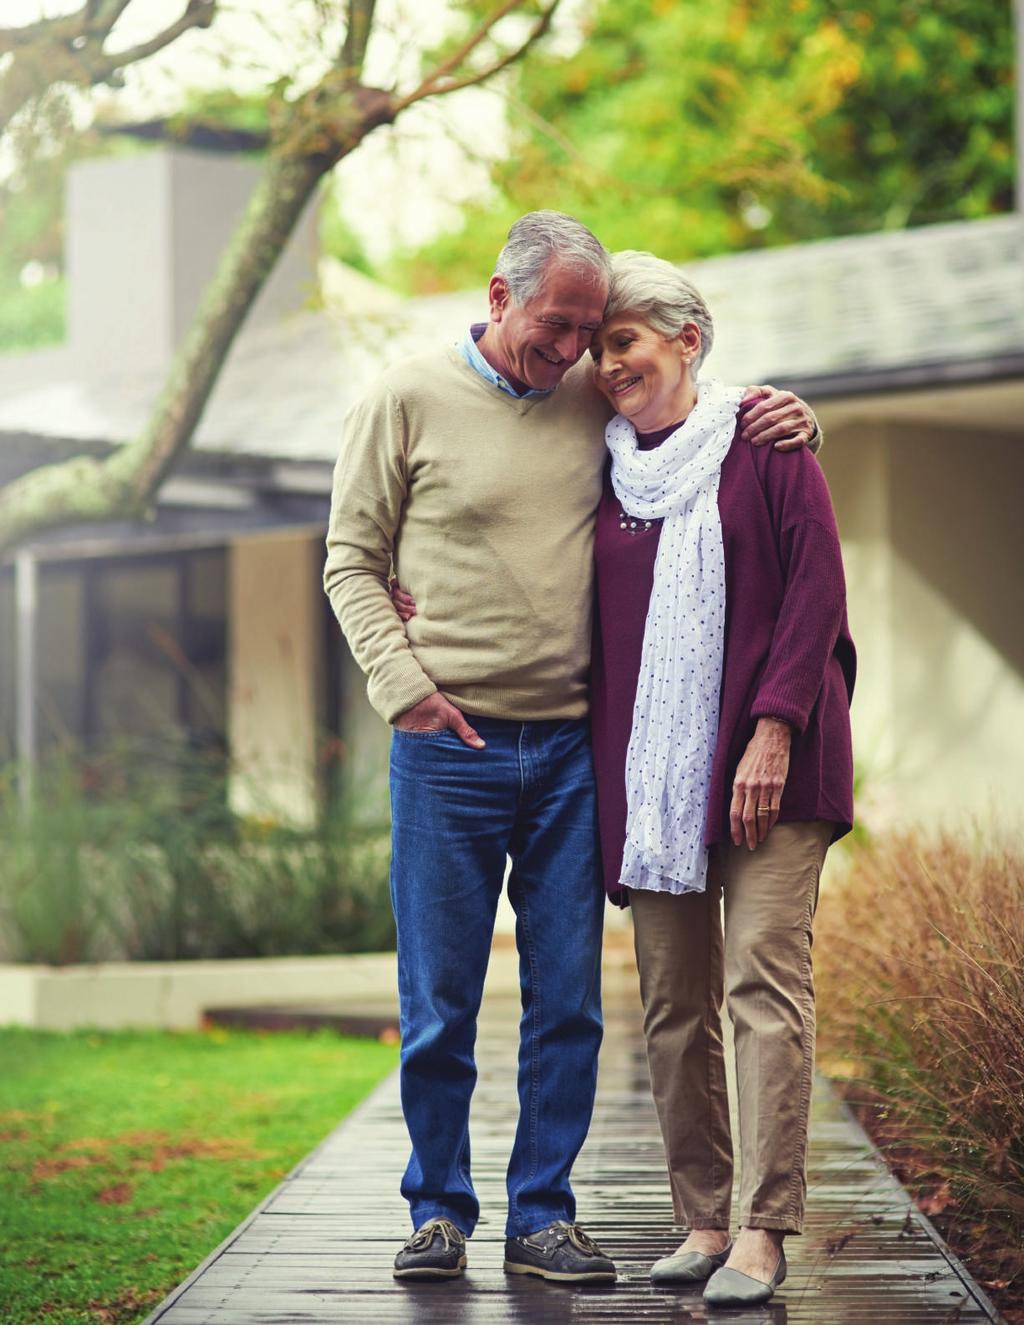 A GUIDE FOR REALTORS Using a Reverse Mortgage to Purchase a Home This material has not been reviewed, approved or issued by HUD, FHA or any government agency.